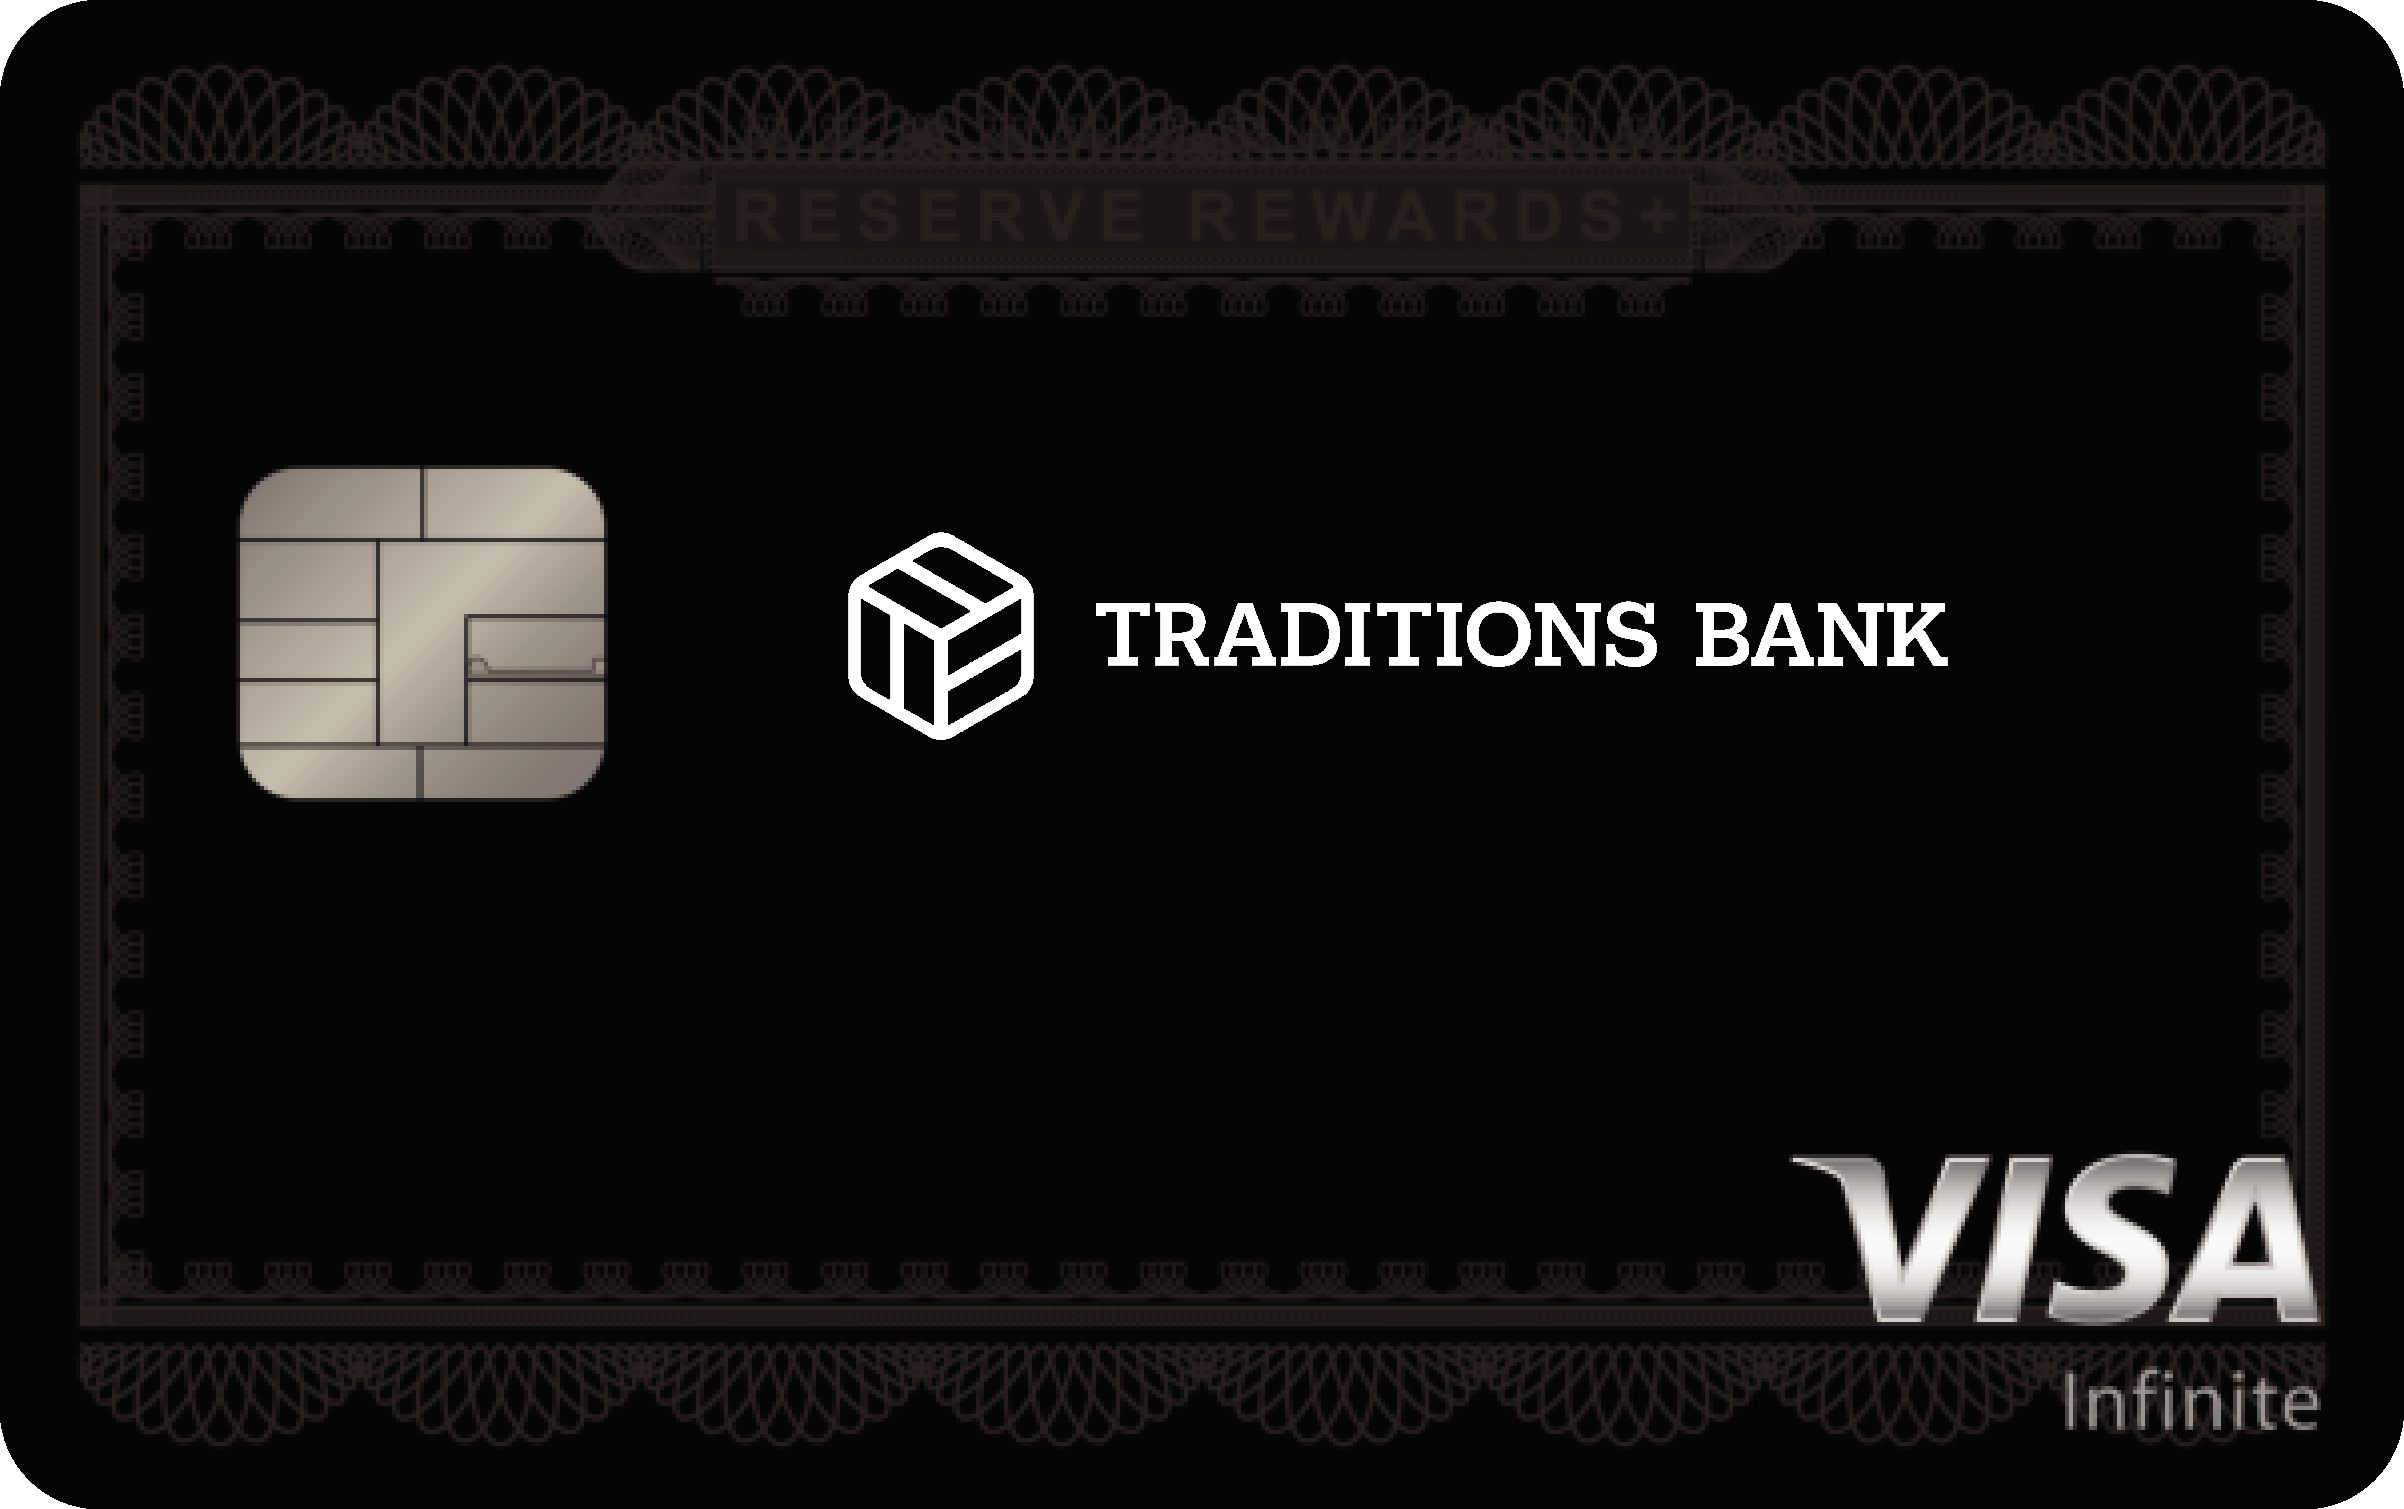 Traditions Bank